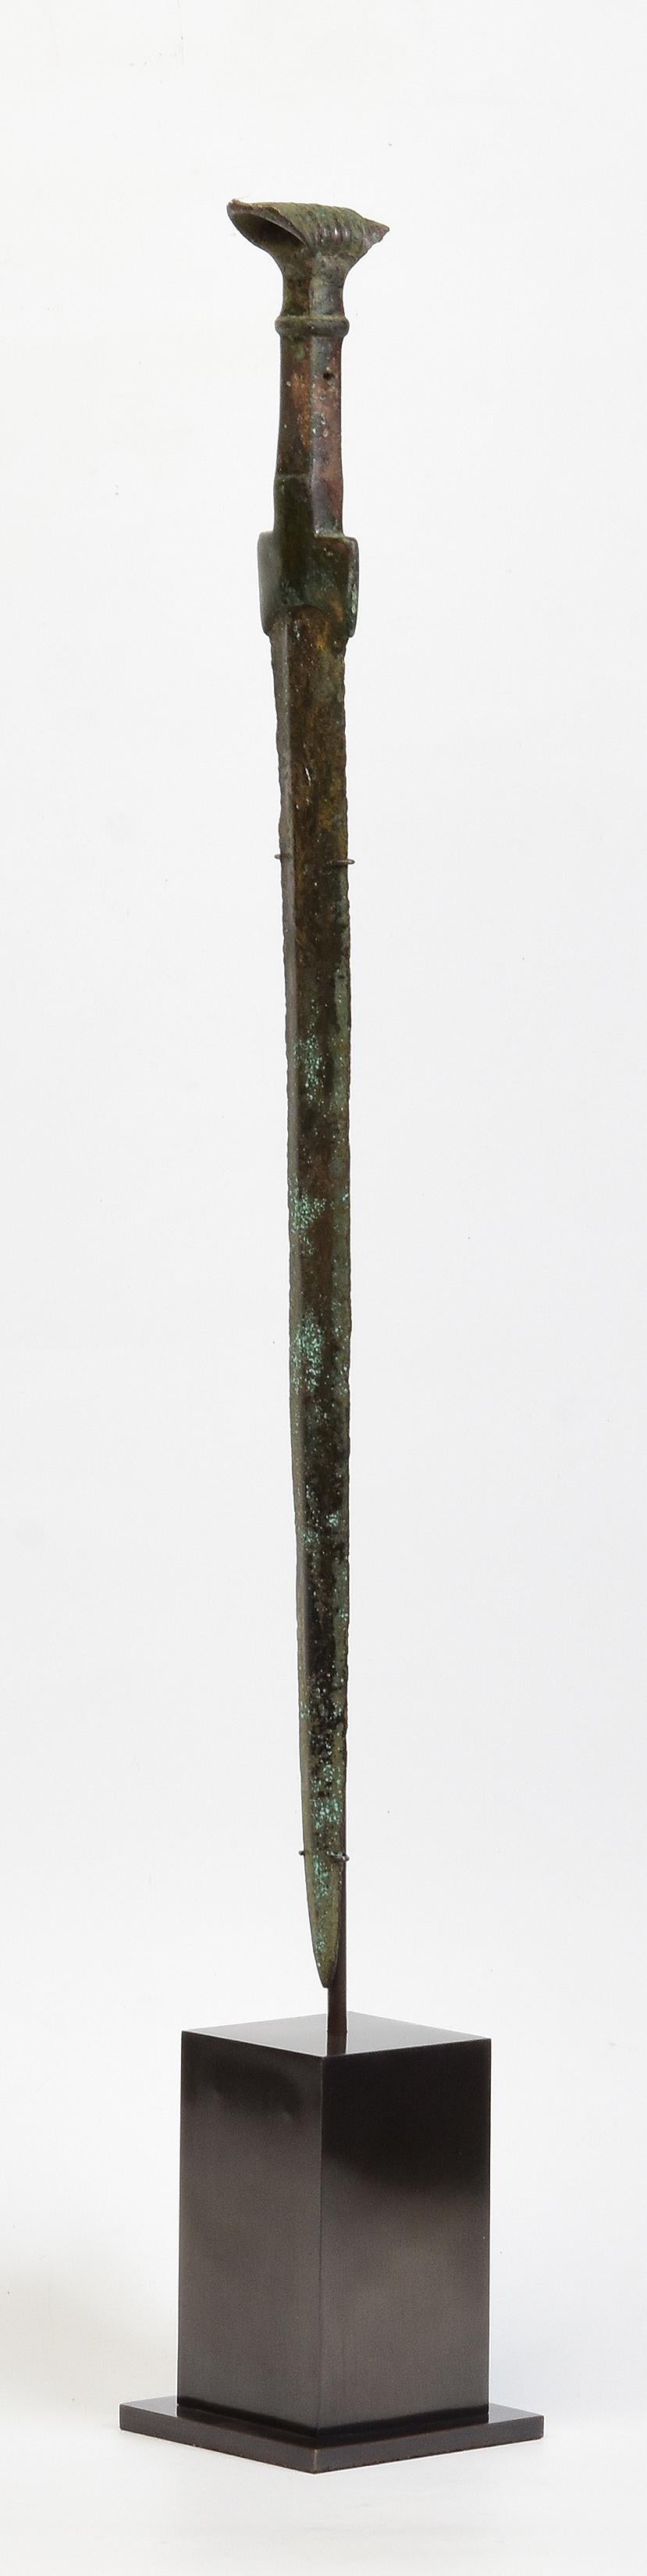 Metalwork Ancient Antique Luristan Bronze Sword / Knife / Dagger / Early Iron Age Weapon For Sale